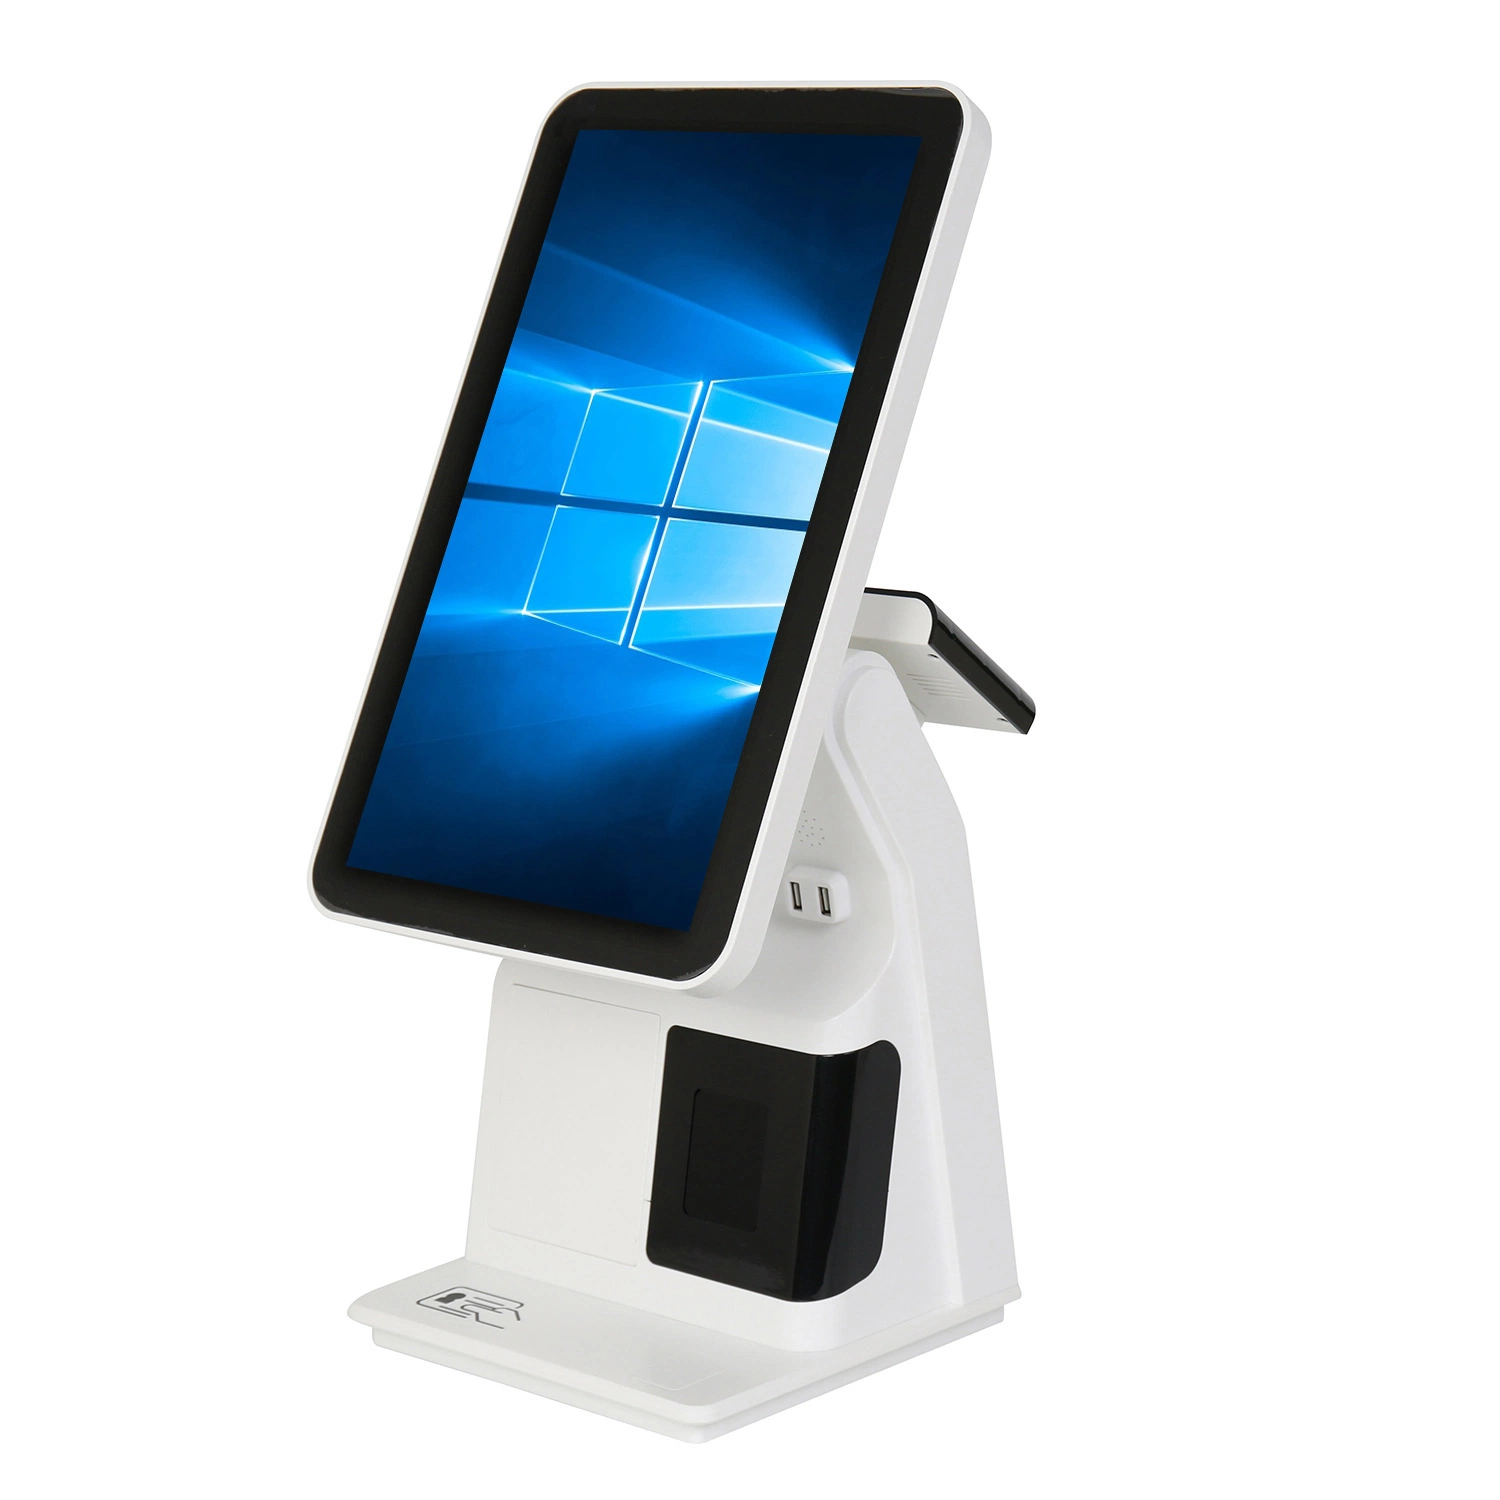 15.6 Inch Windows Touch Screen All in One Cash Register POS System